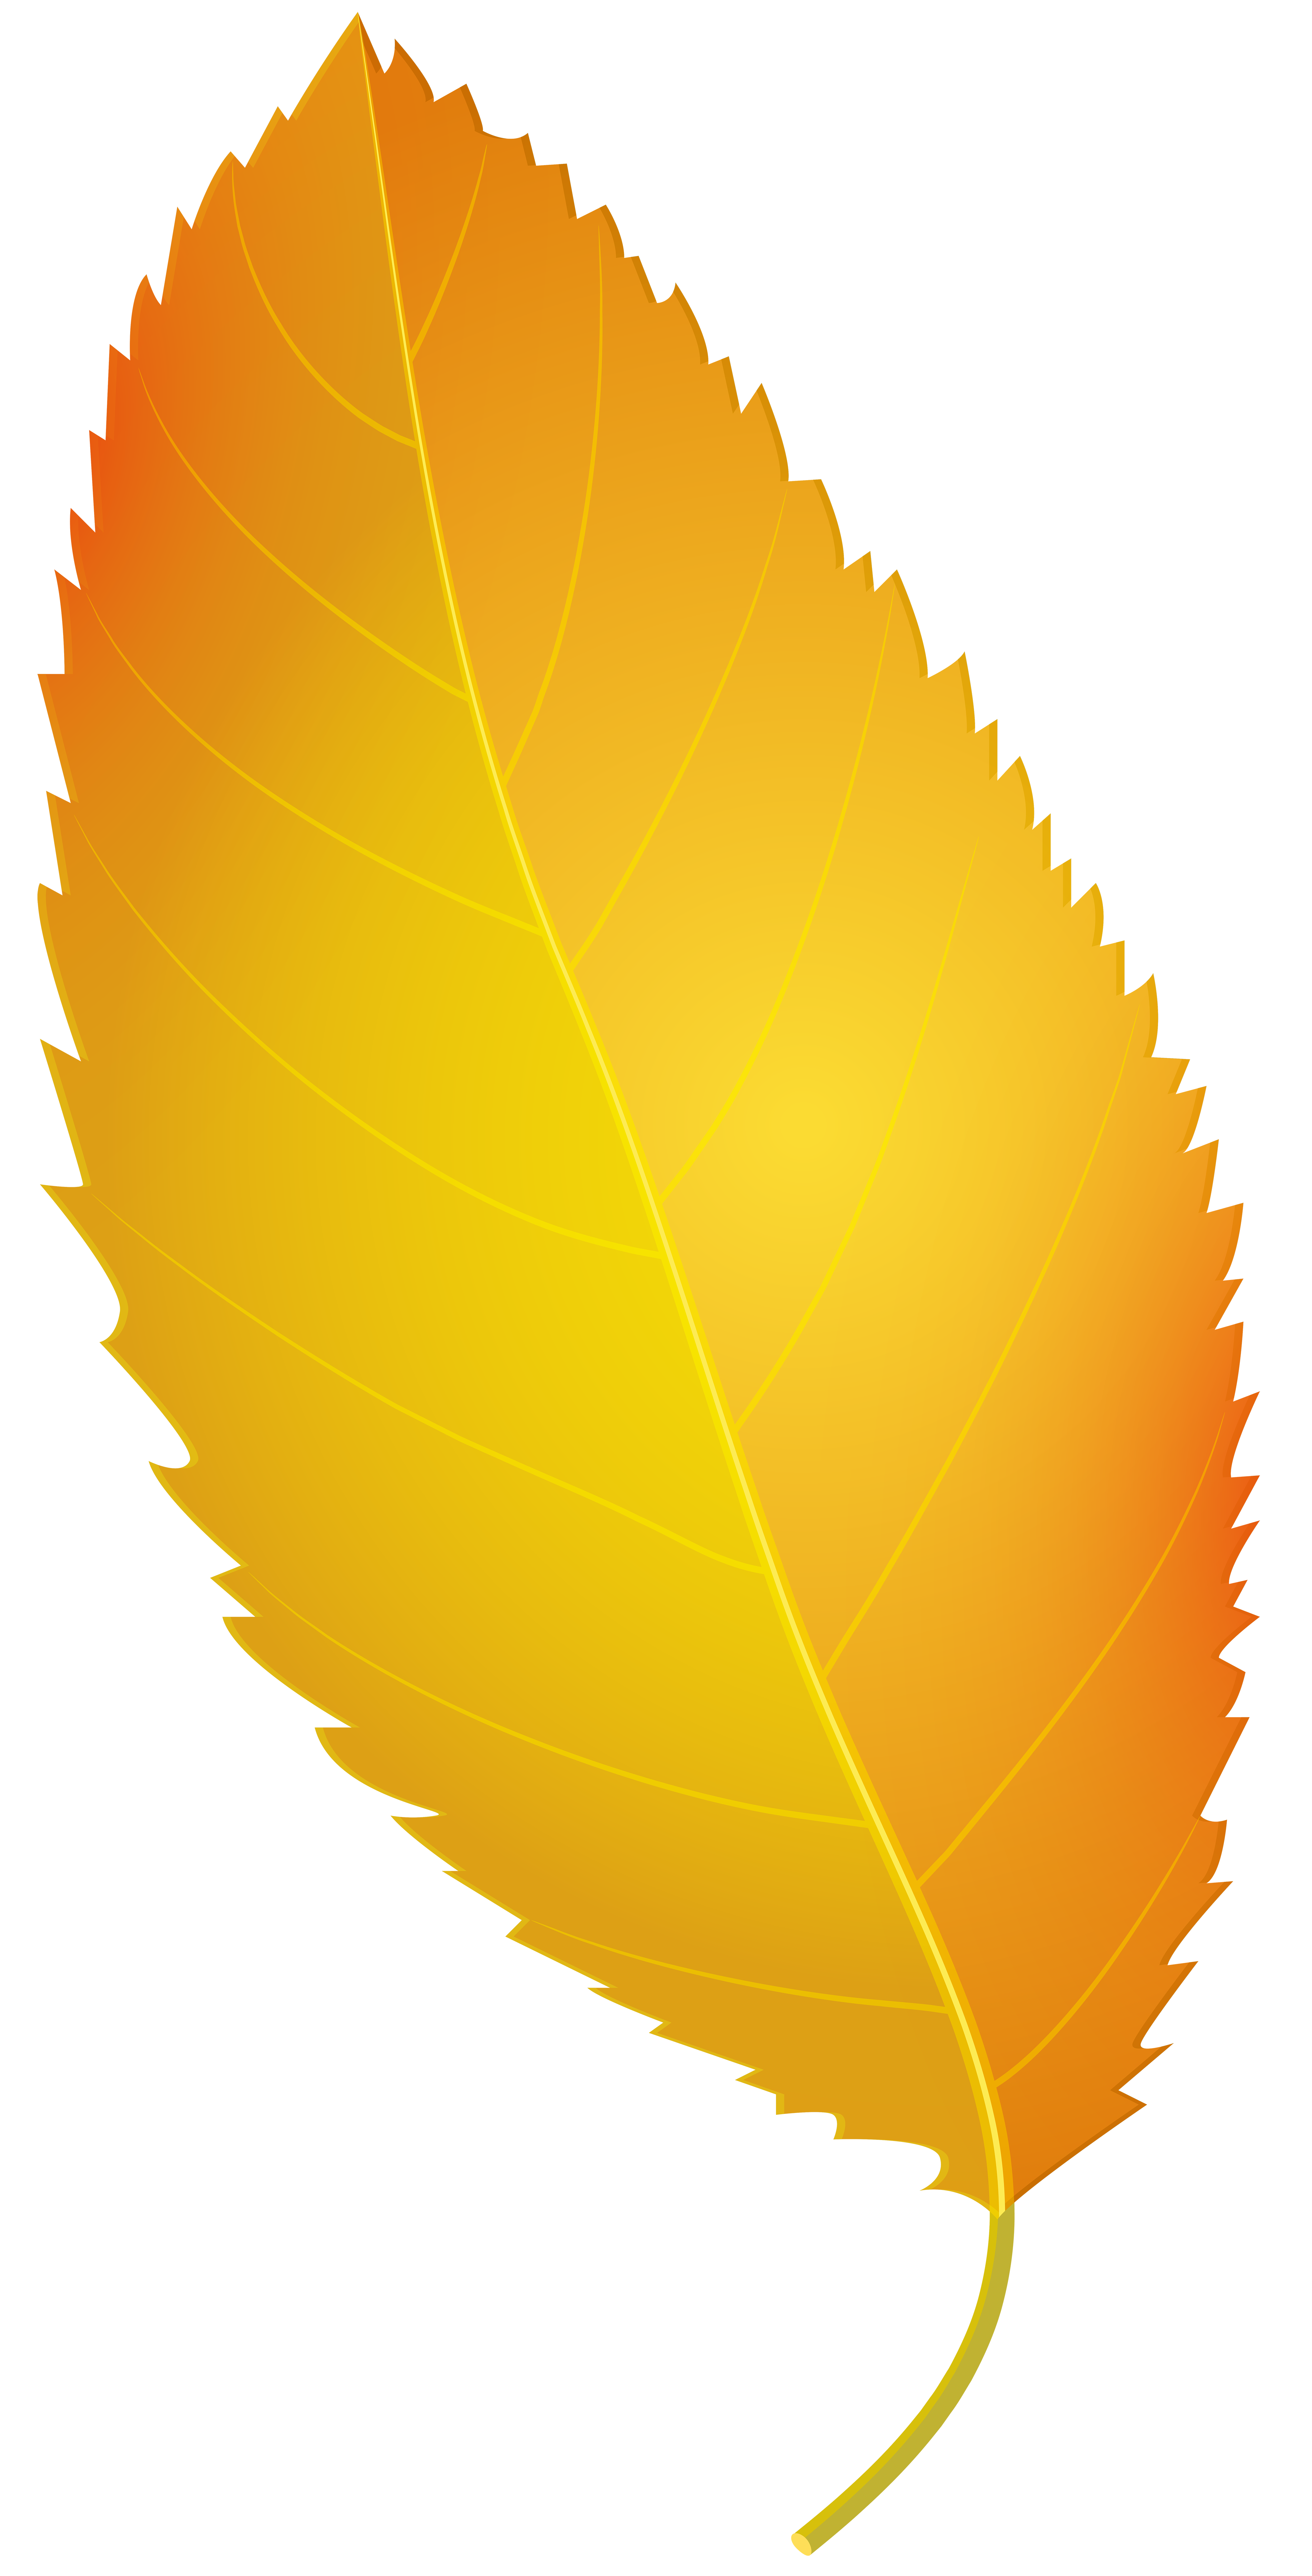 fall leaf clipart no background